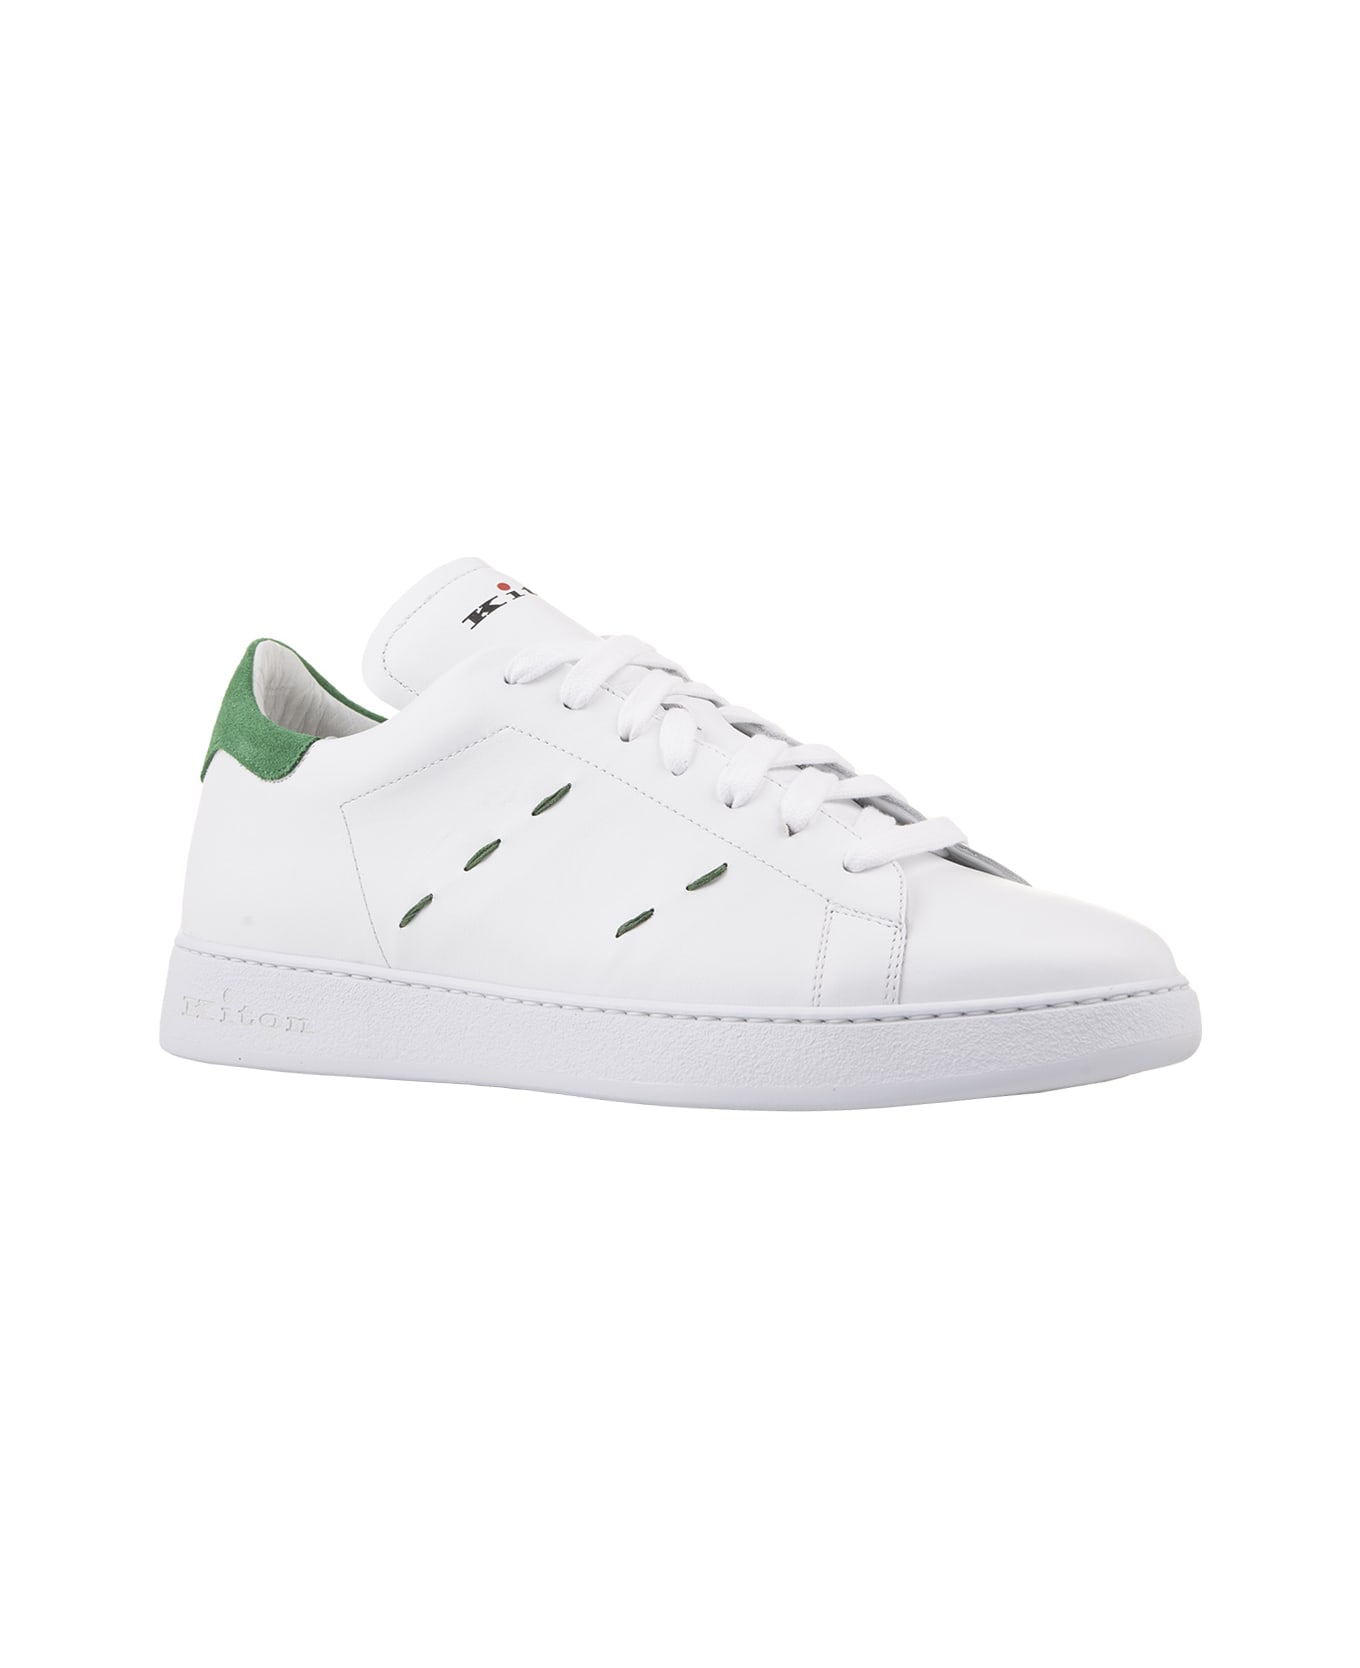 Kiton White Leather Sneakers With Green Details - Green